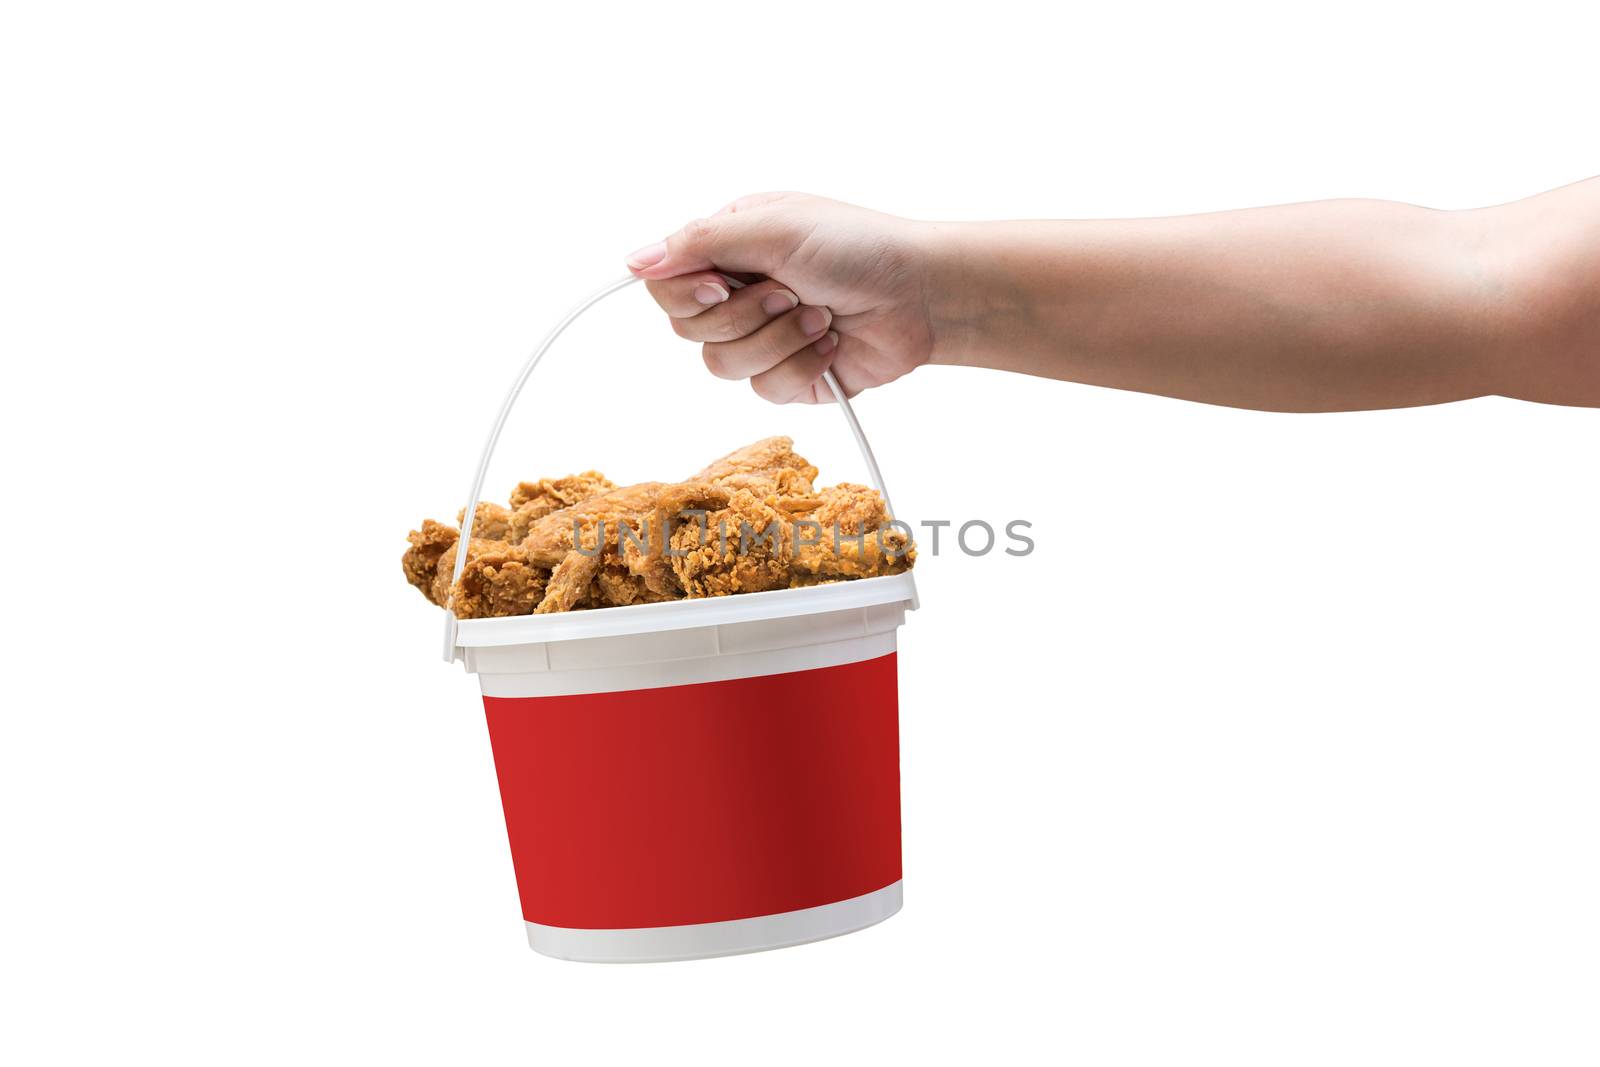 A hand holding a bucket of crispy fried chicken on a white background